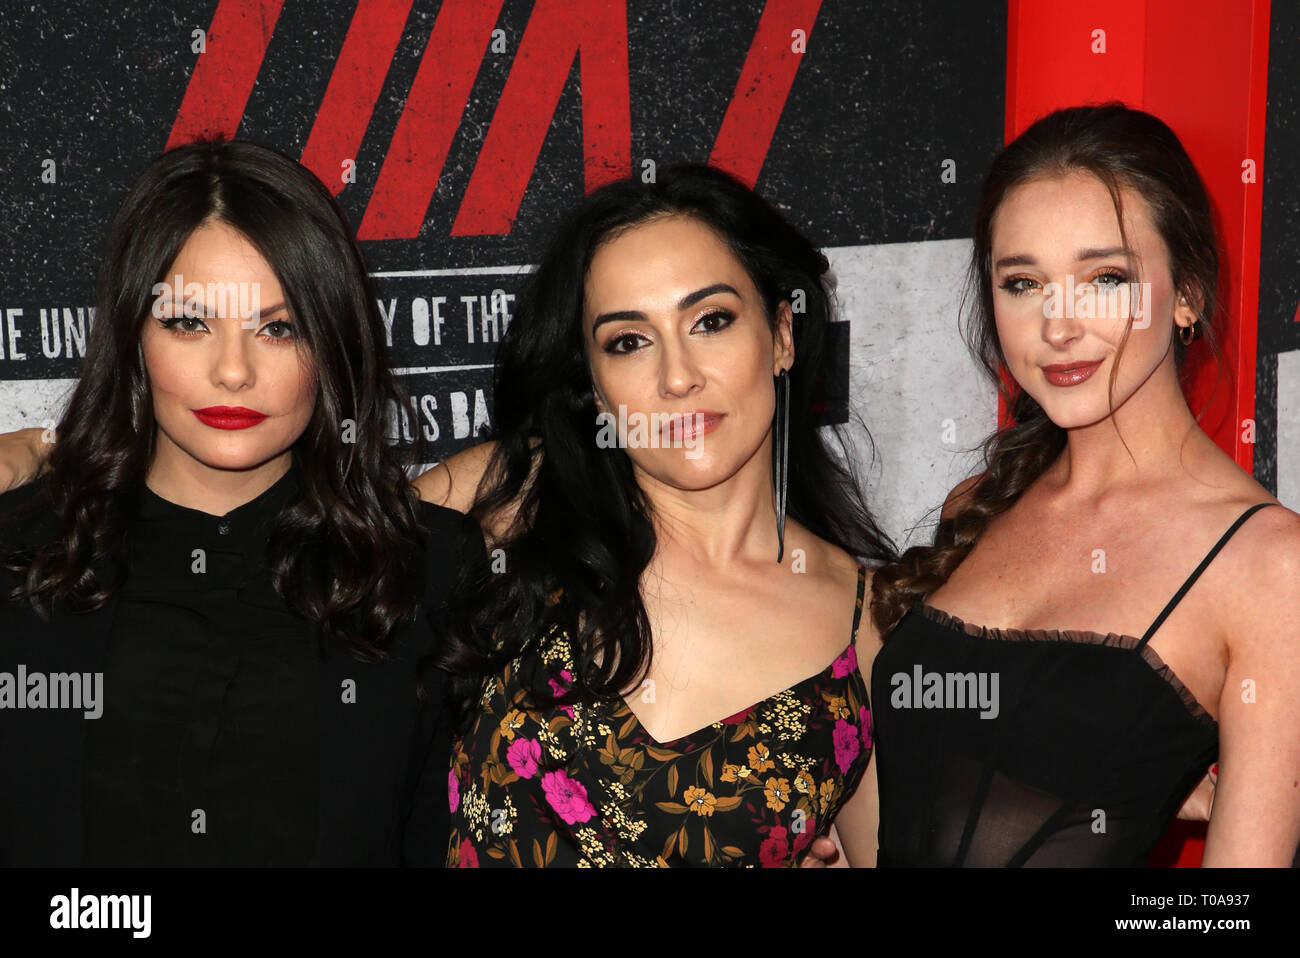 Los Angeles, Ca, USA. 18th Mar, 2019.Alexanne Wagner, Elena Evangelo, Courtney Dietz, at the NETFLIX premiere of The Dirt at The ArcLight Hollywood in Los Angeles, California on March 18, 2019. Credit: Faye Sadou/Media Punch/Alamy Live News Stock Photo